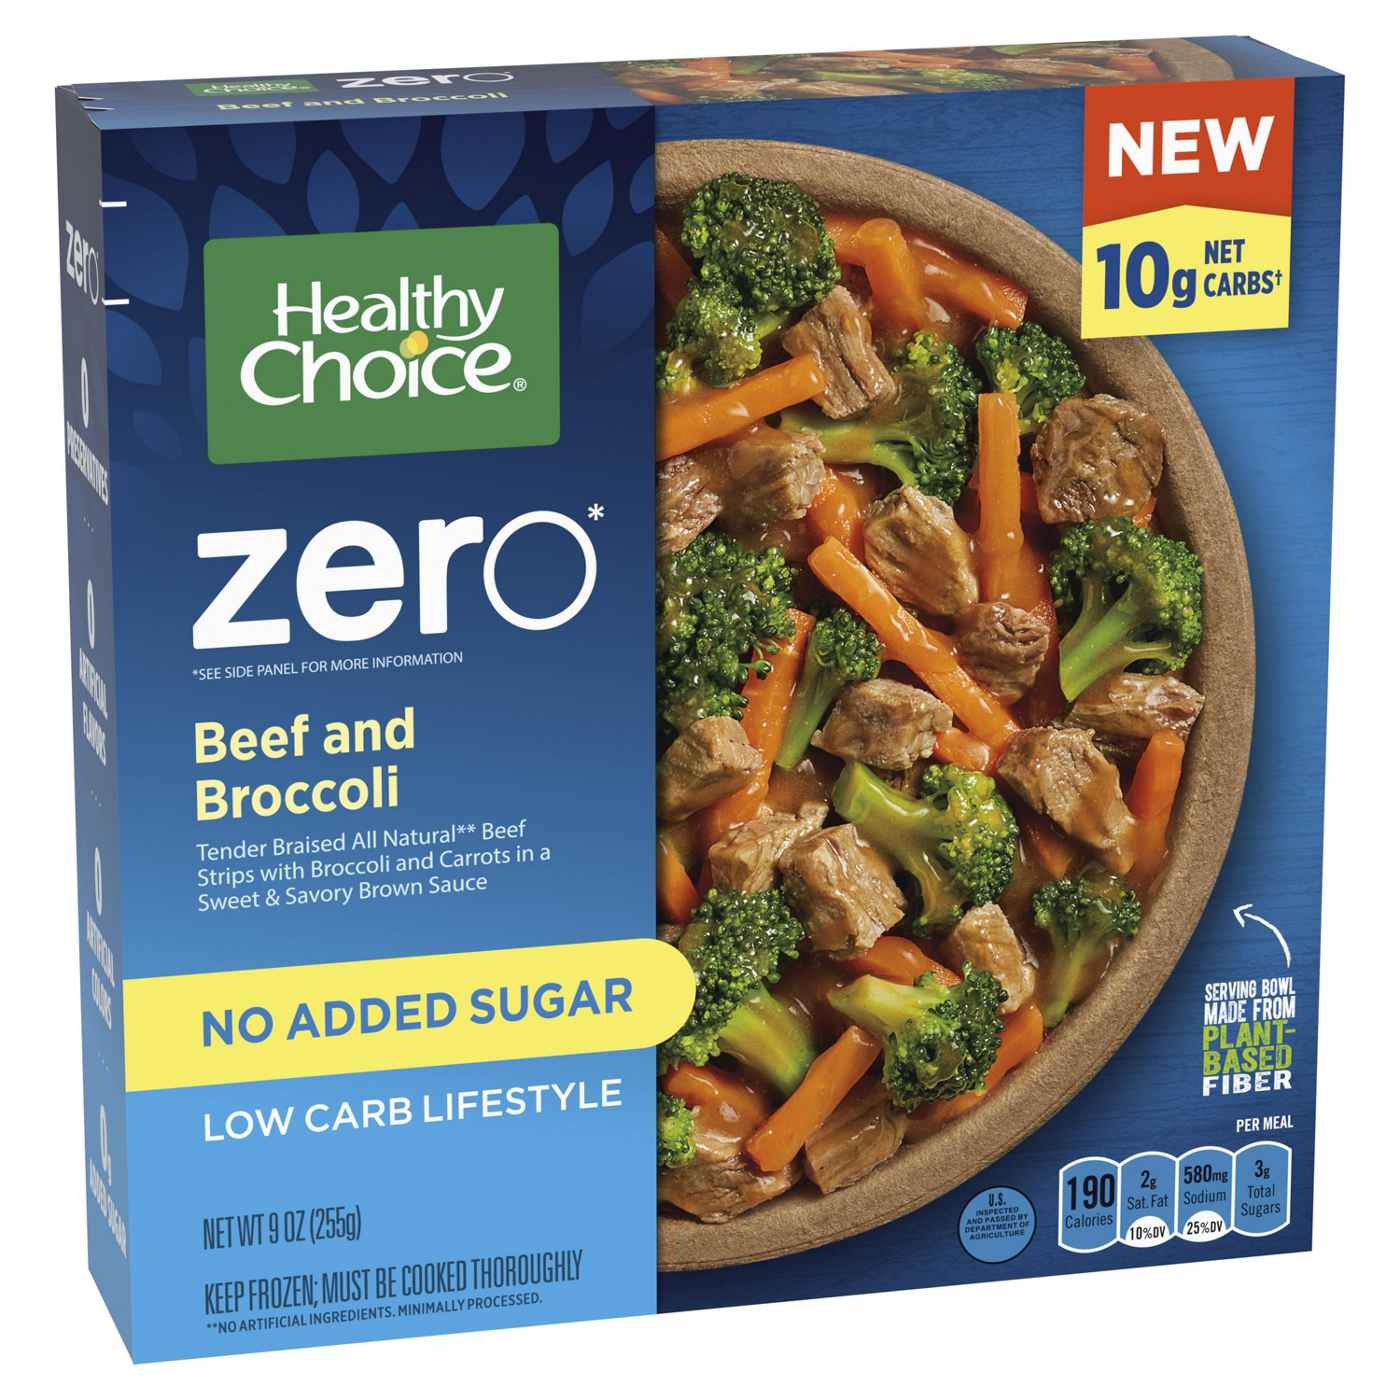 Healthy Choice Zero Low Carb Lifestyle Beef & Broccoli Frozen Meal; image 3 of 5